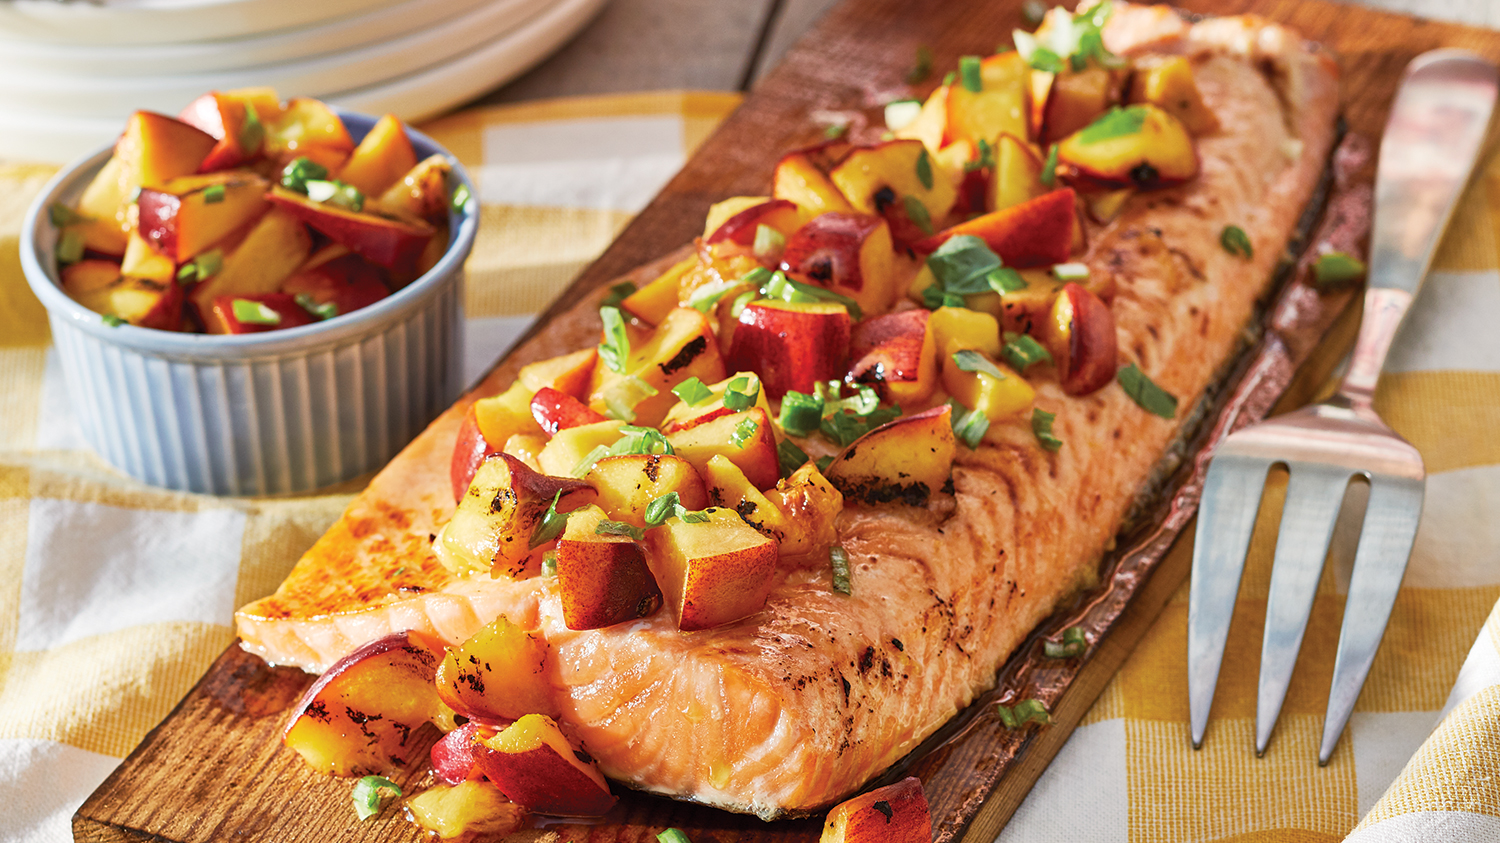 https://www.sobeys.com/wp-content/uploads/2020/06/Recipe_Grilled_Peaches_And_Planked_Salmon_B.jpg